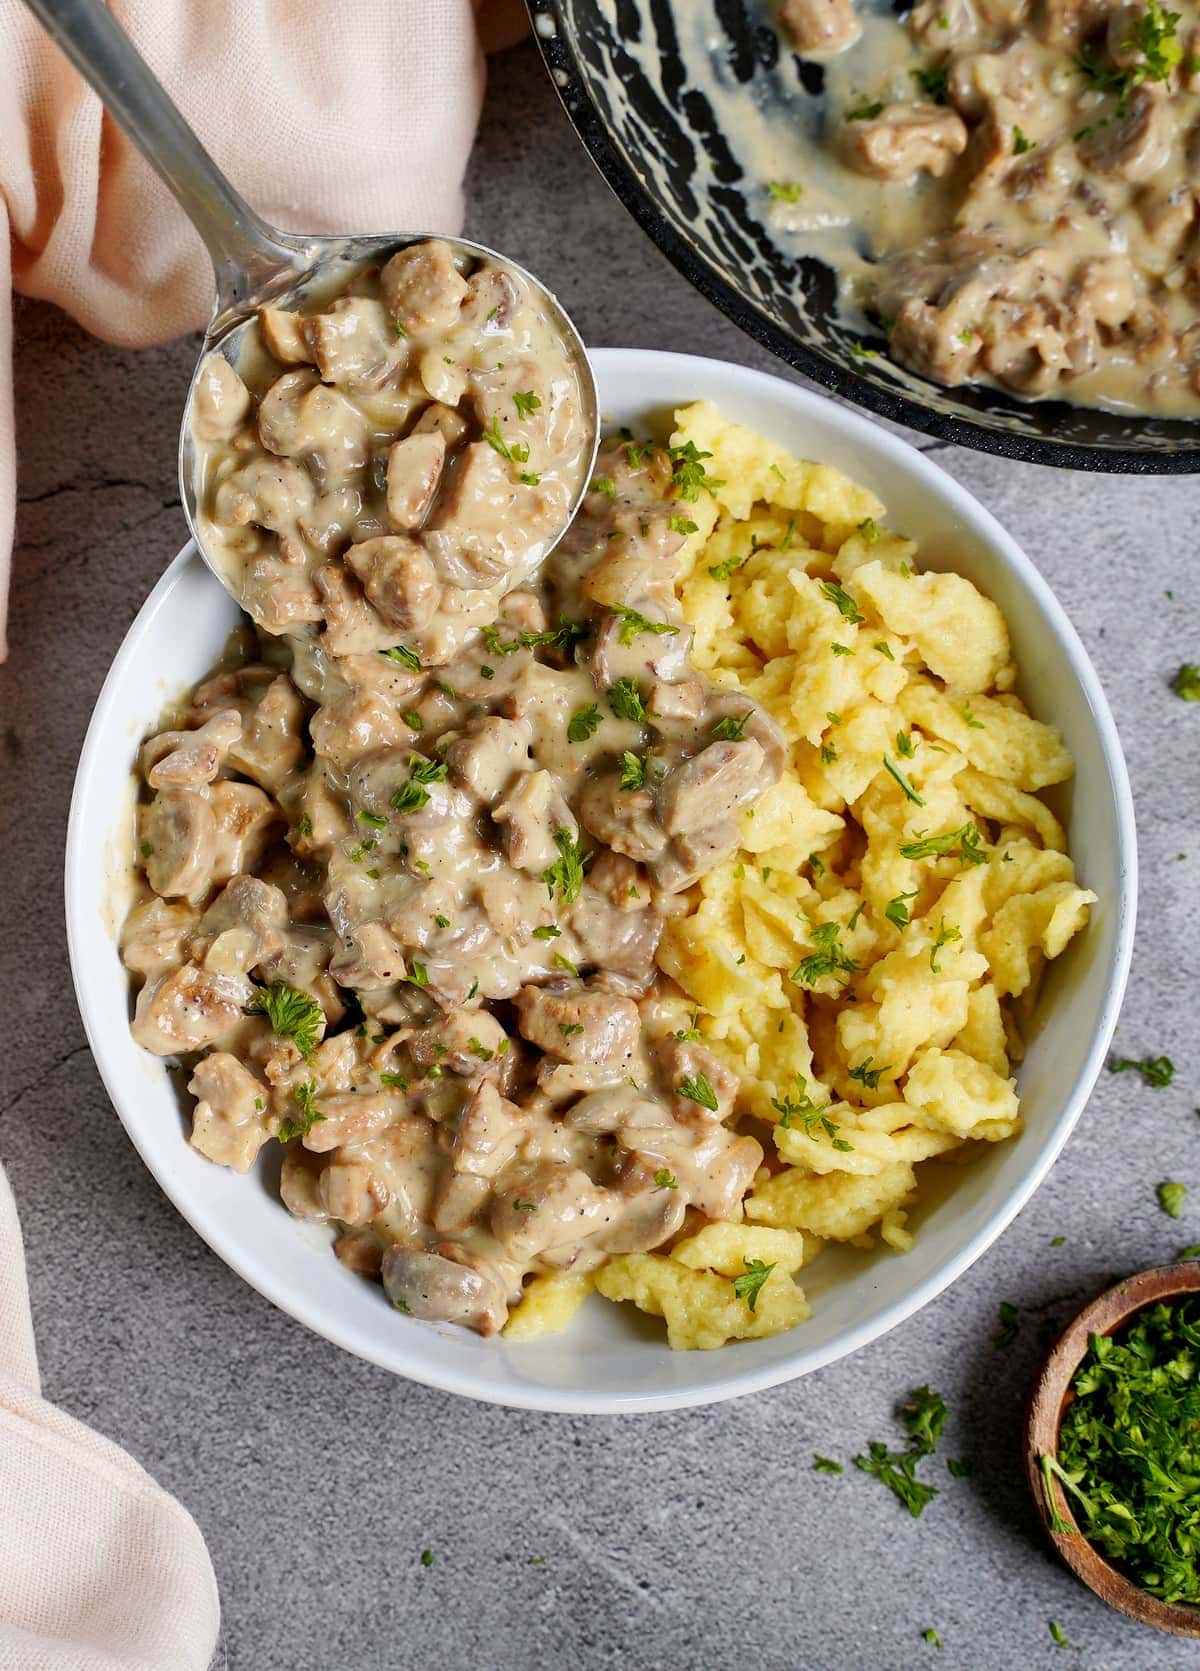 creamy mushroom sauce with geschnetzeltes and spaetzle in bowl